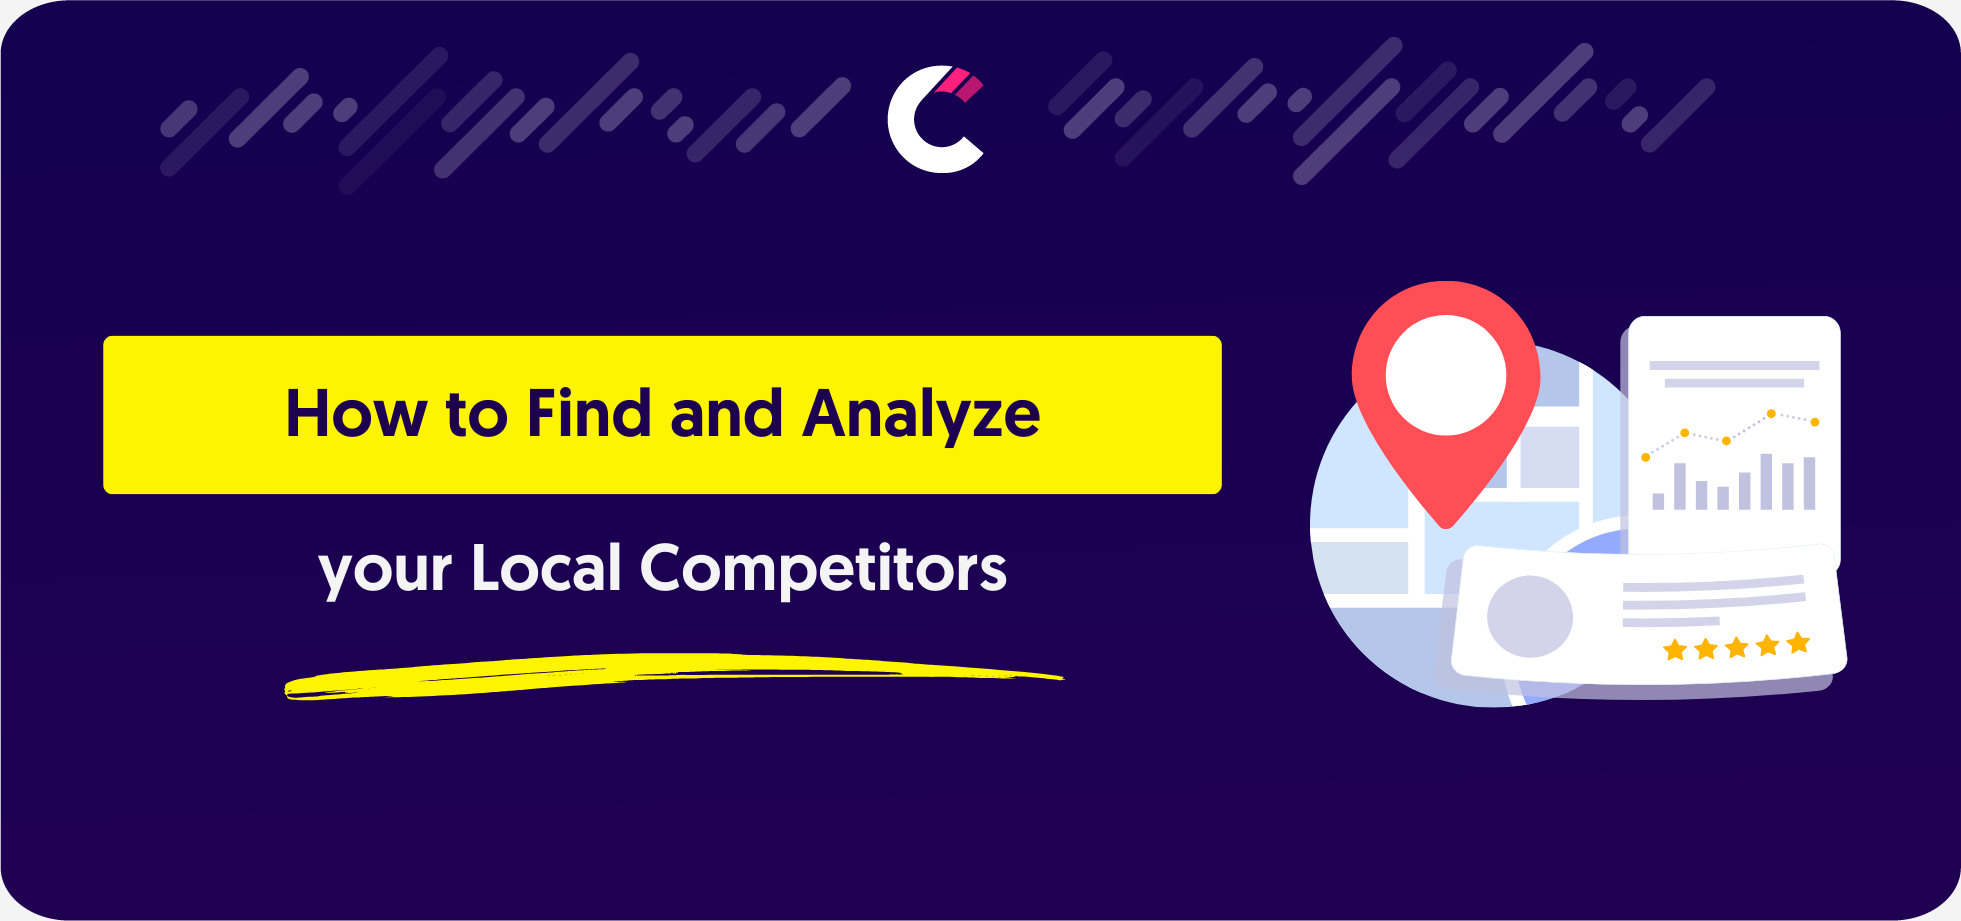 How to find and analyze your local competitors